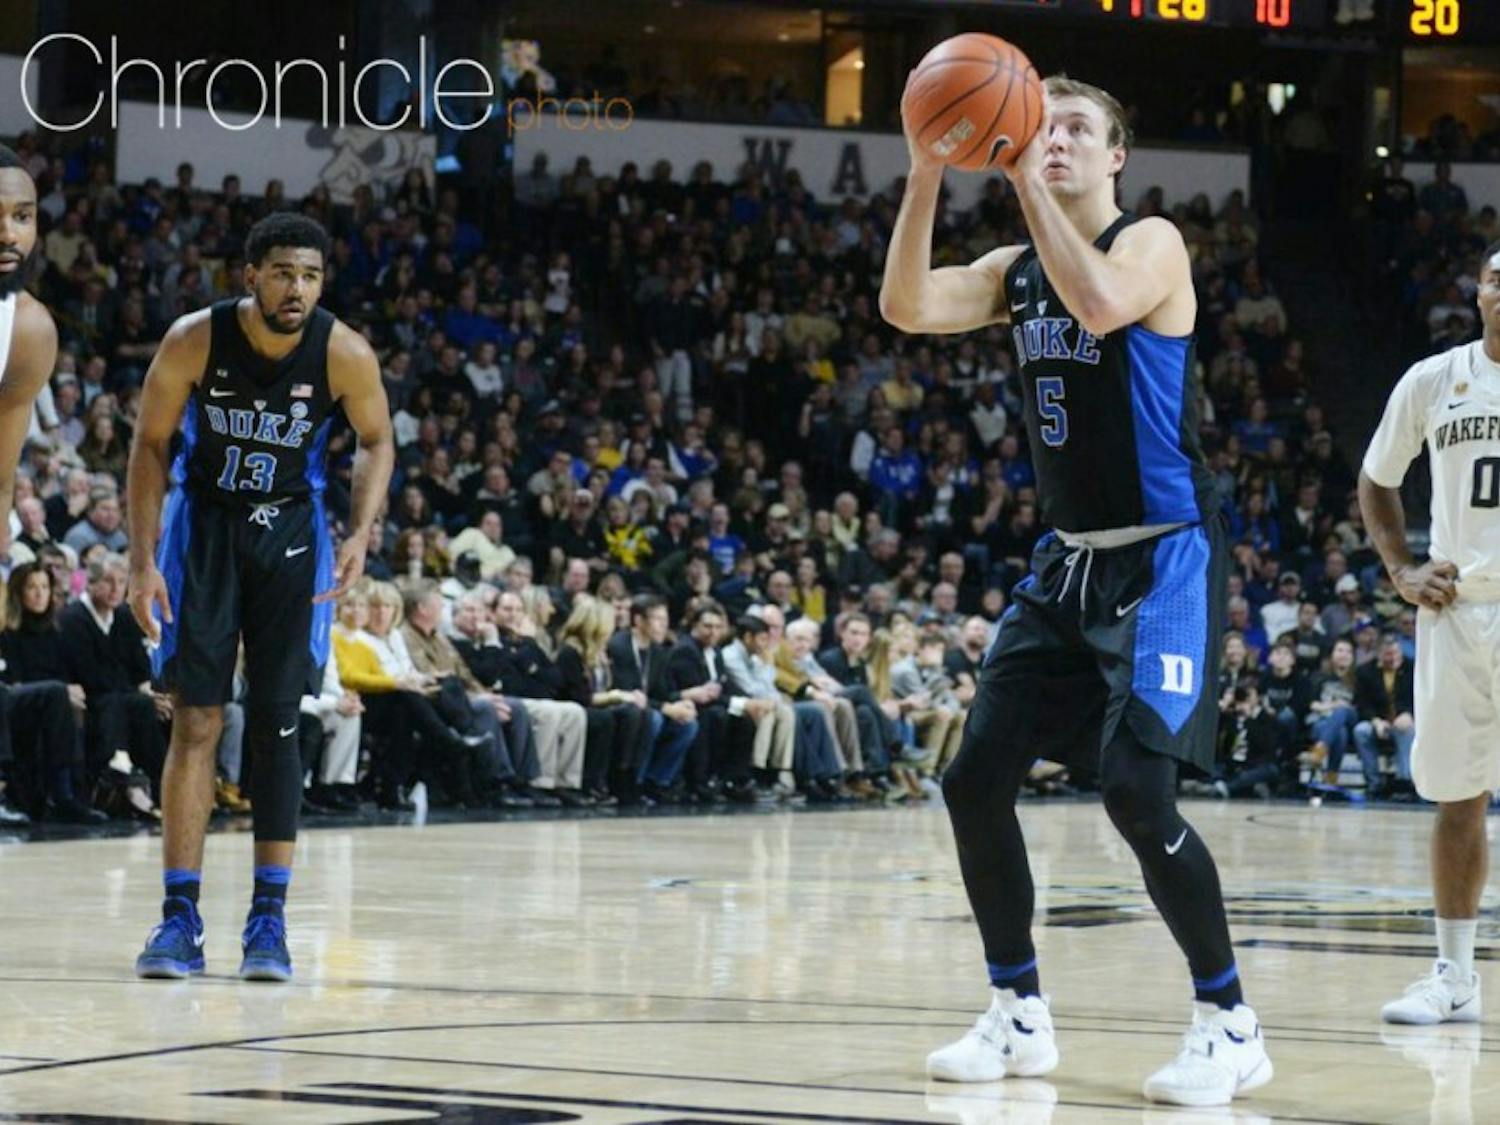 Luke Kennard scored 12 of Duke's last 15 points to carry the Blue Devils back from a 10-point deficit in the final four minutes.